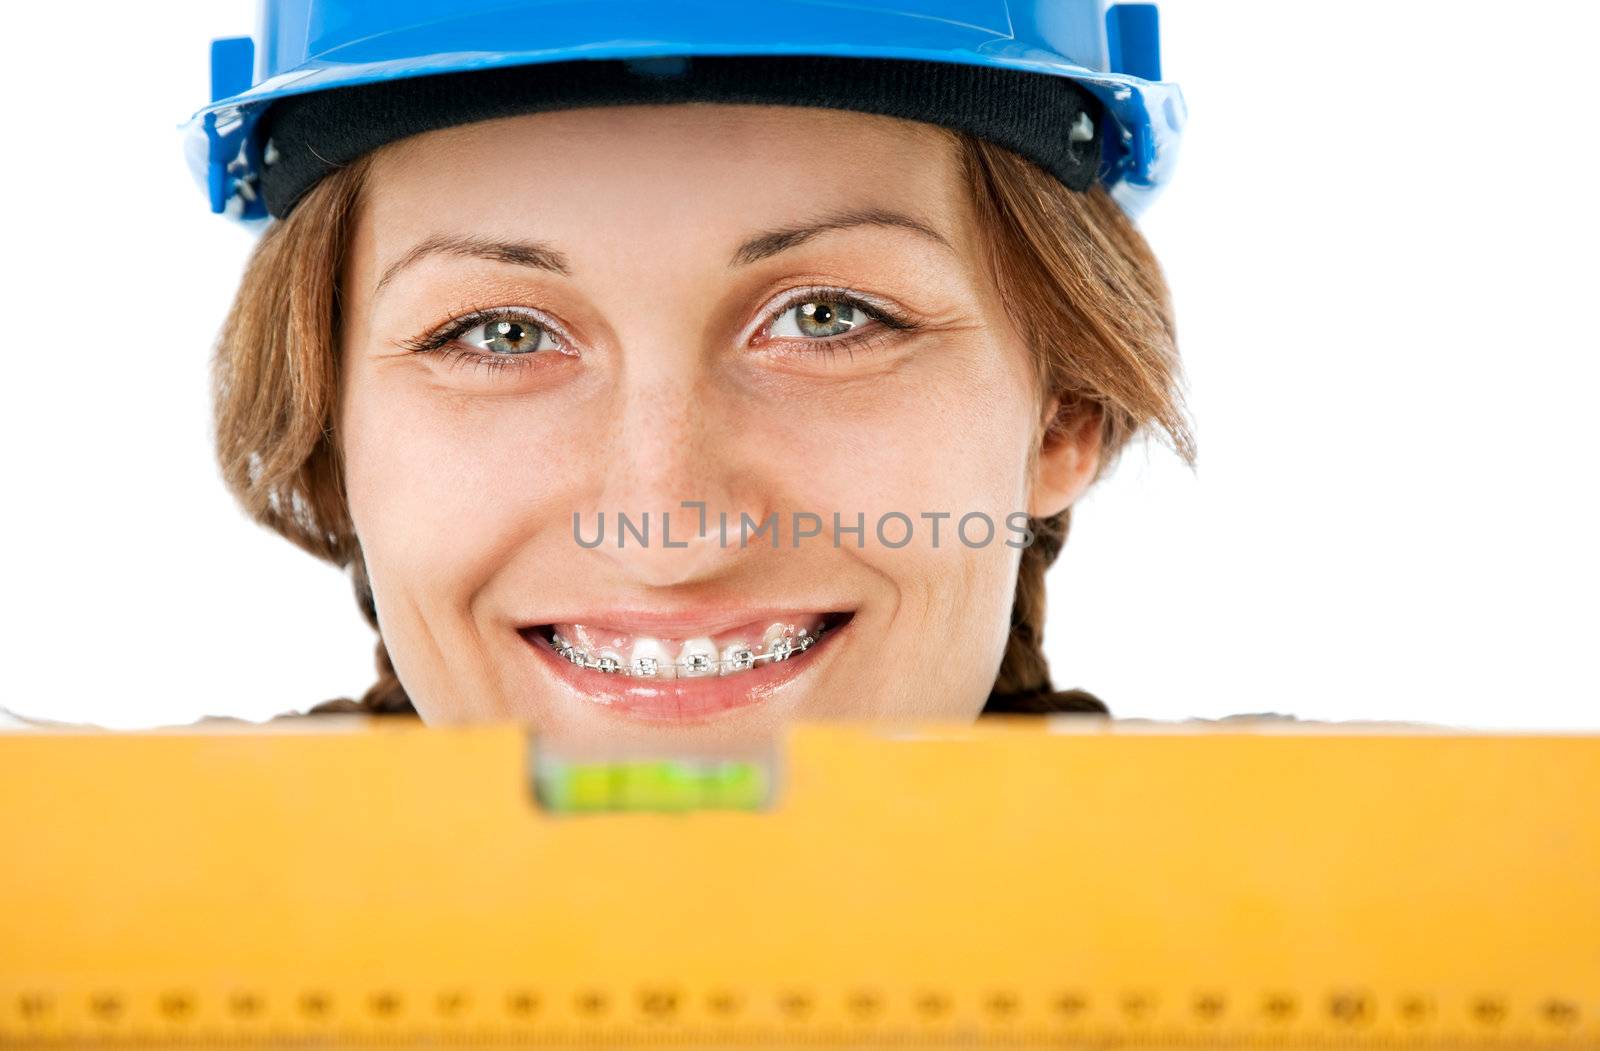 Close-up of female worker with hardhat and braces smiling behind level